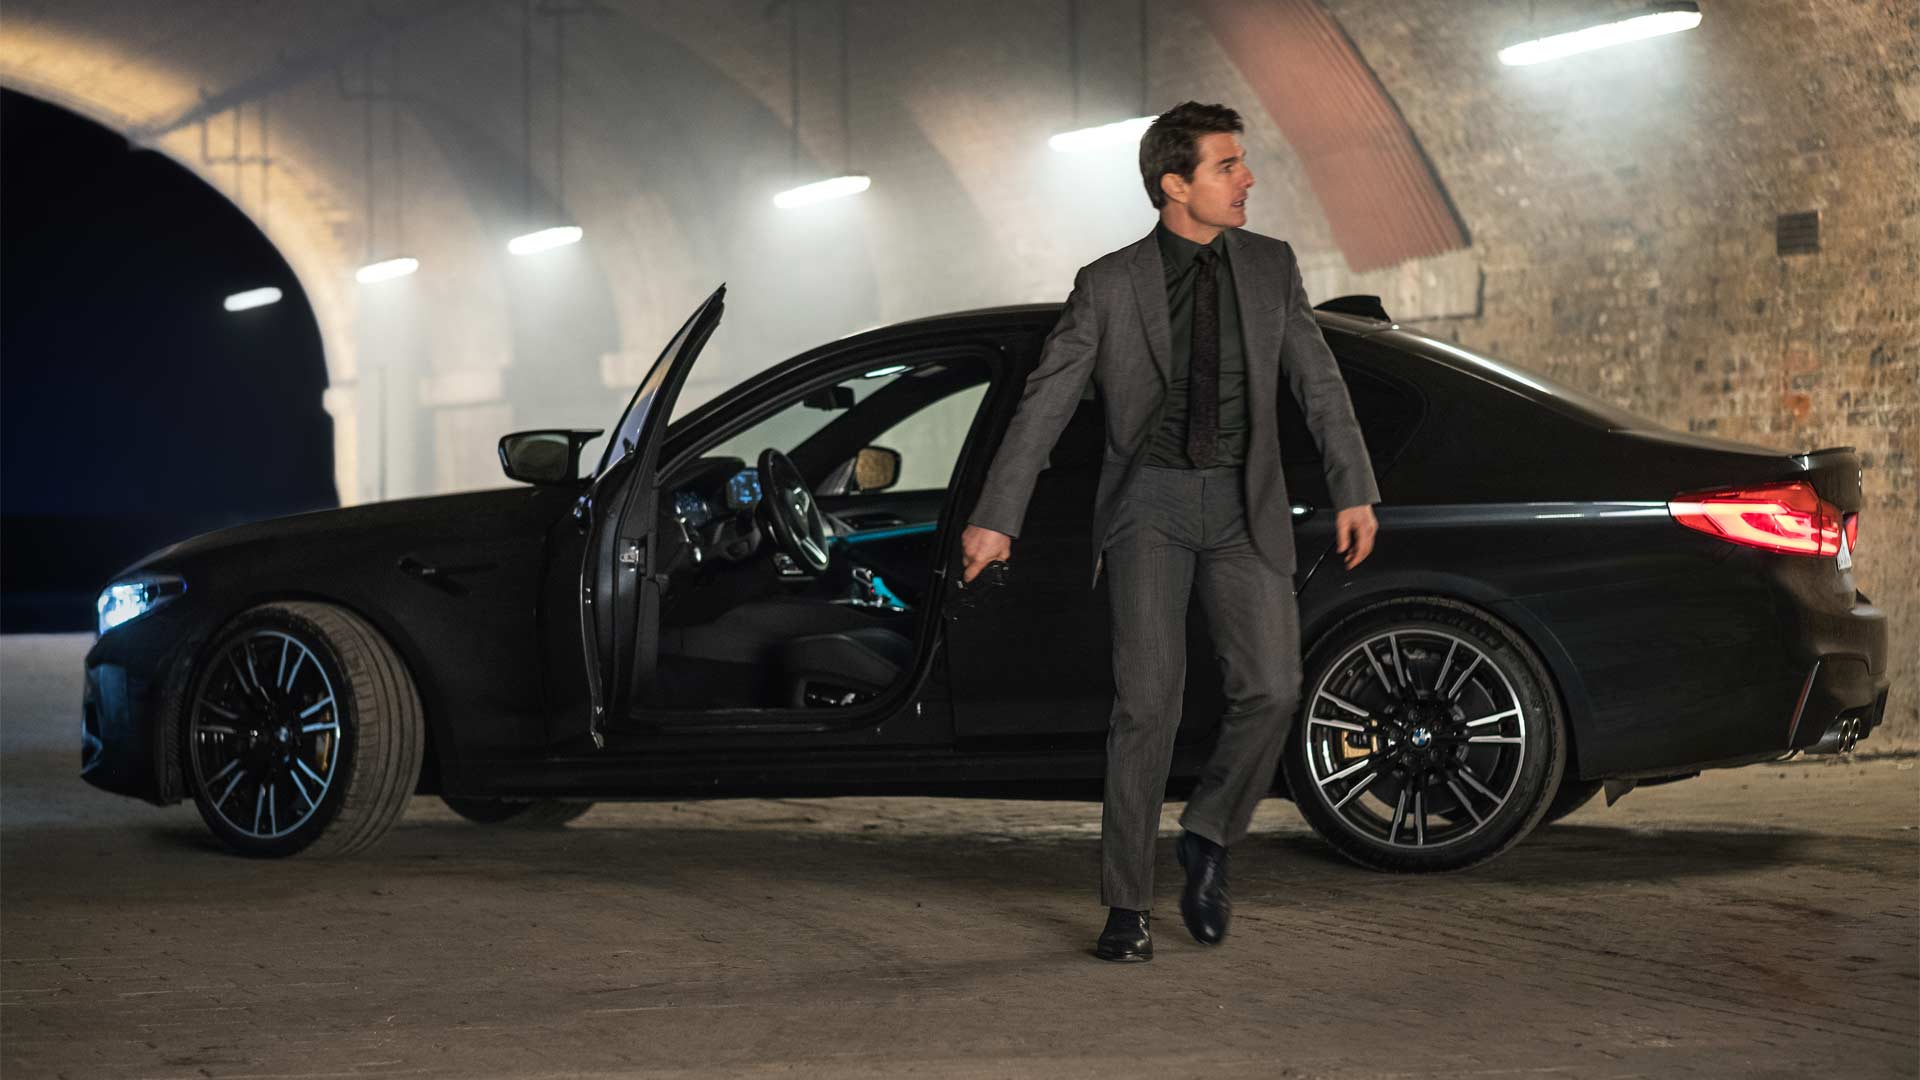 2018-BMW-M5-Tom-Cruise-Mission-Impossible-Fallout